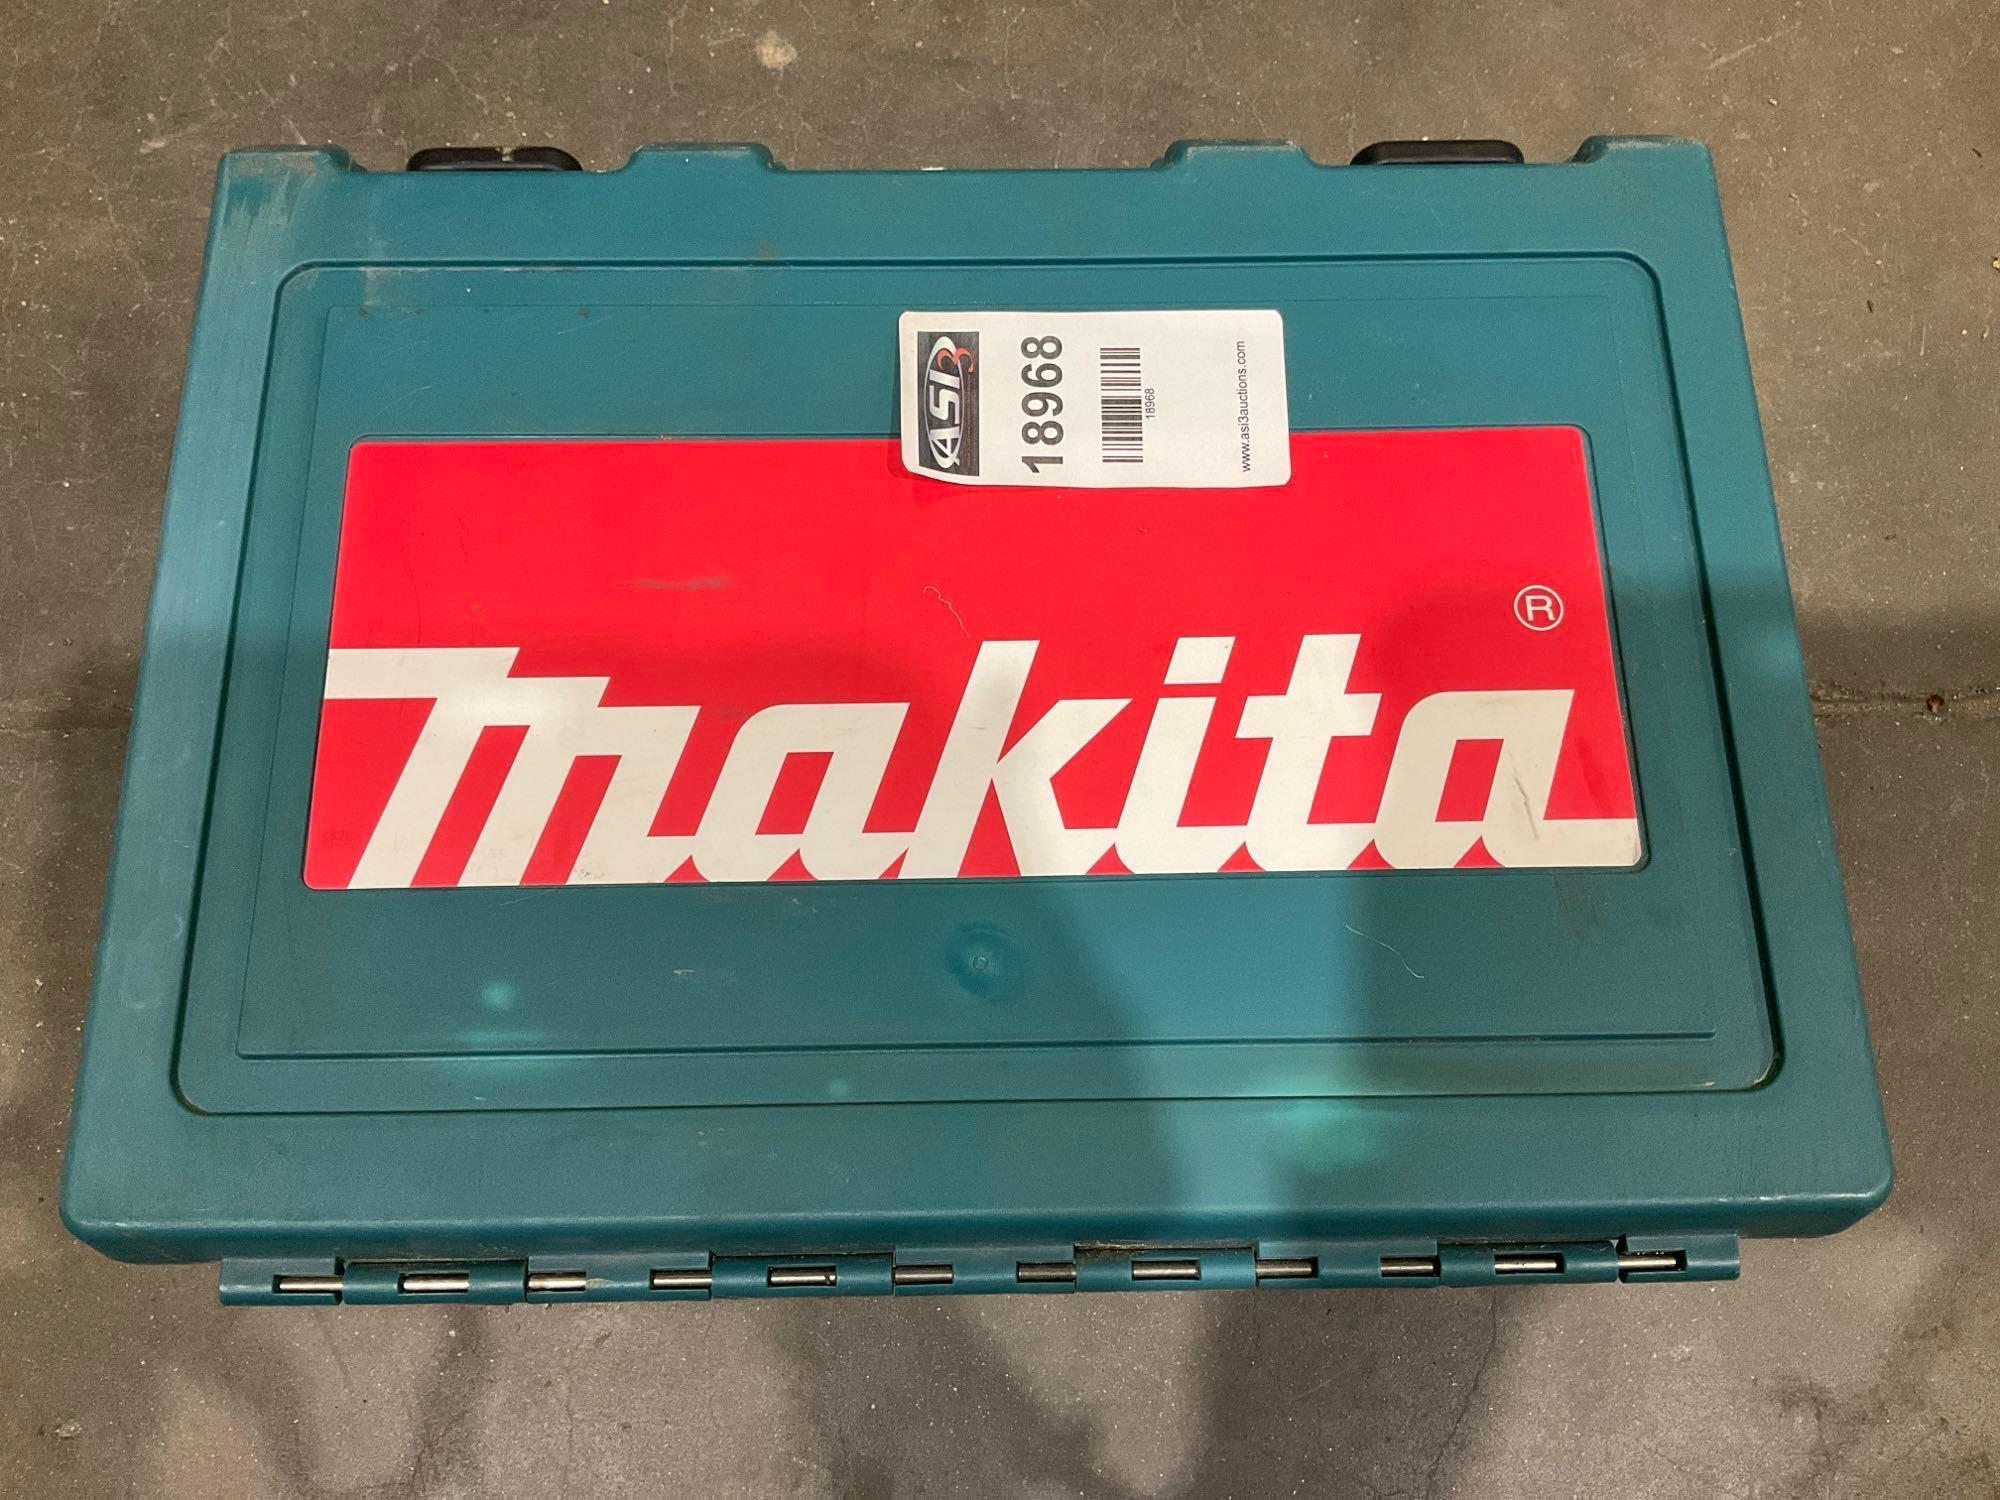 MAKITA 2 SPEED HAMMER DRILL MODEL HP2050 WITH CARRYING CASE , 120VOLTS, 6.6A, RECONDITIONED